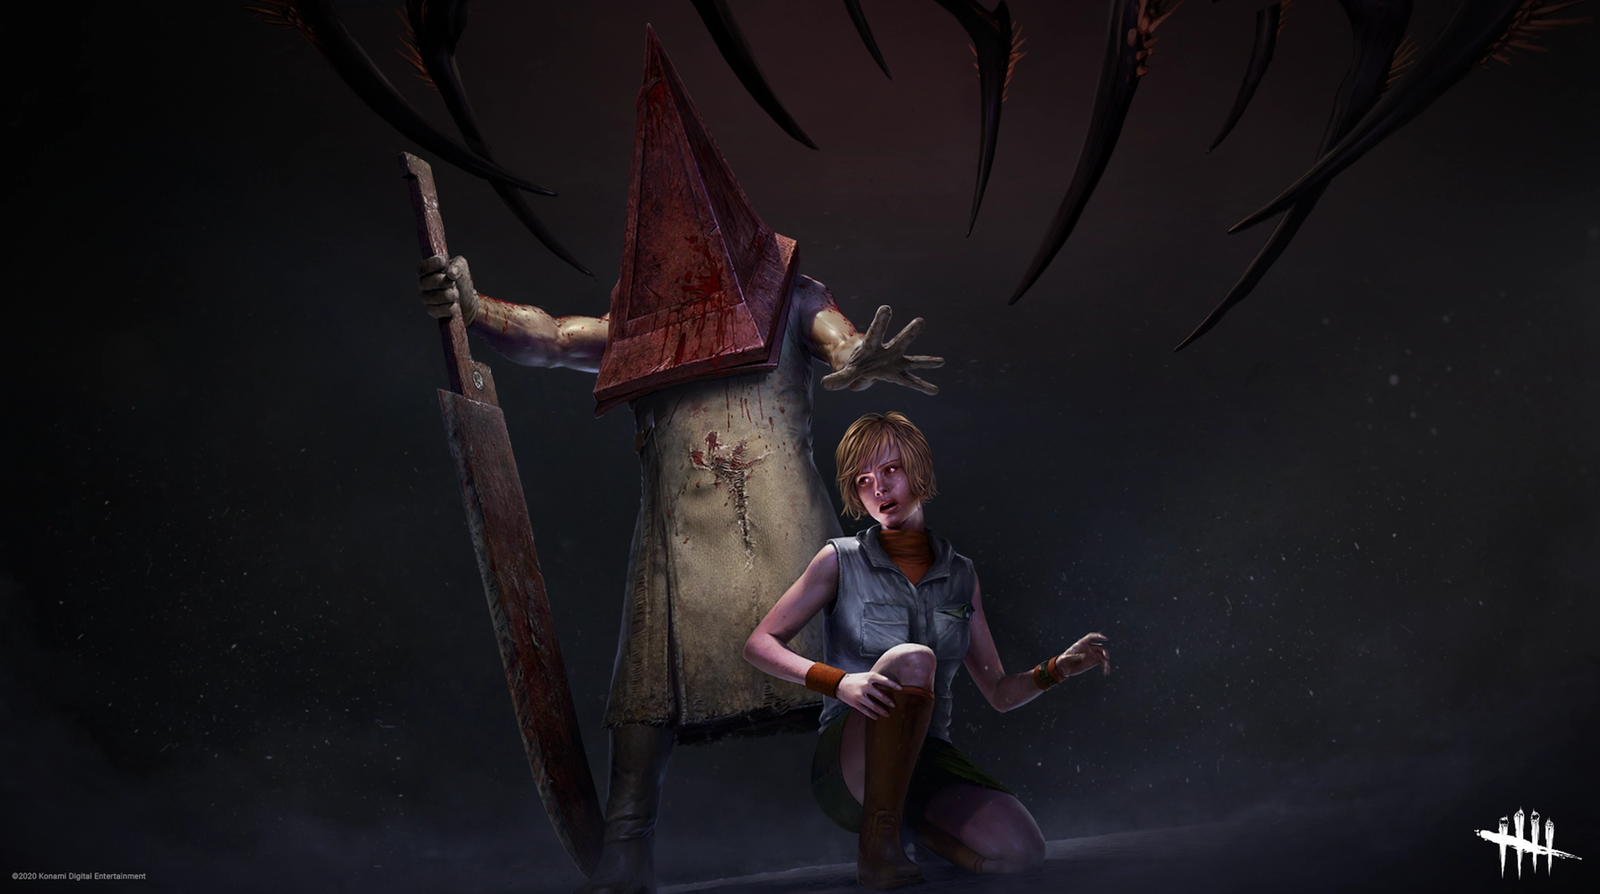 Image of Pyramid Head in Dead By Daylight.